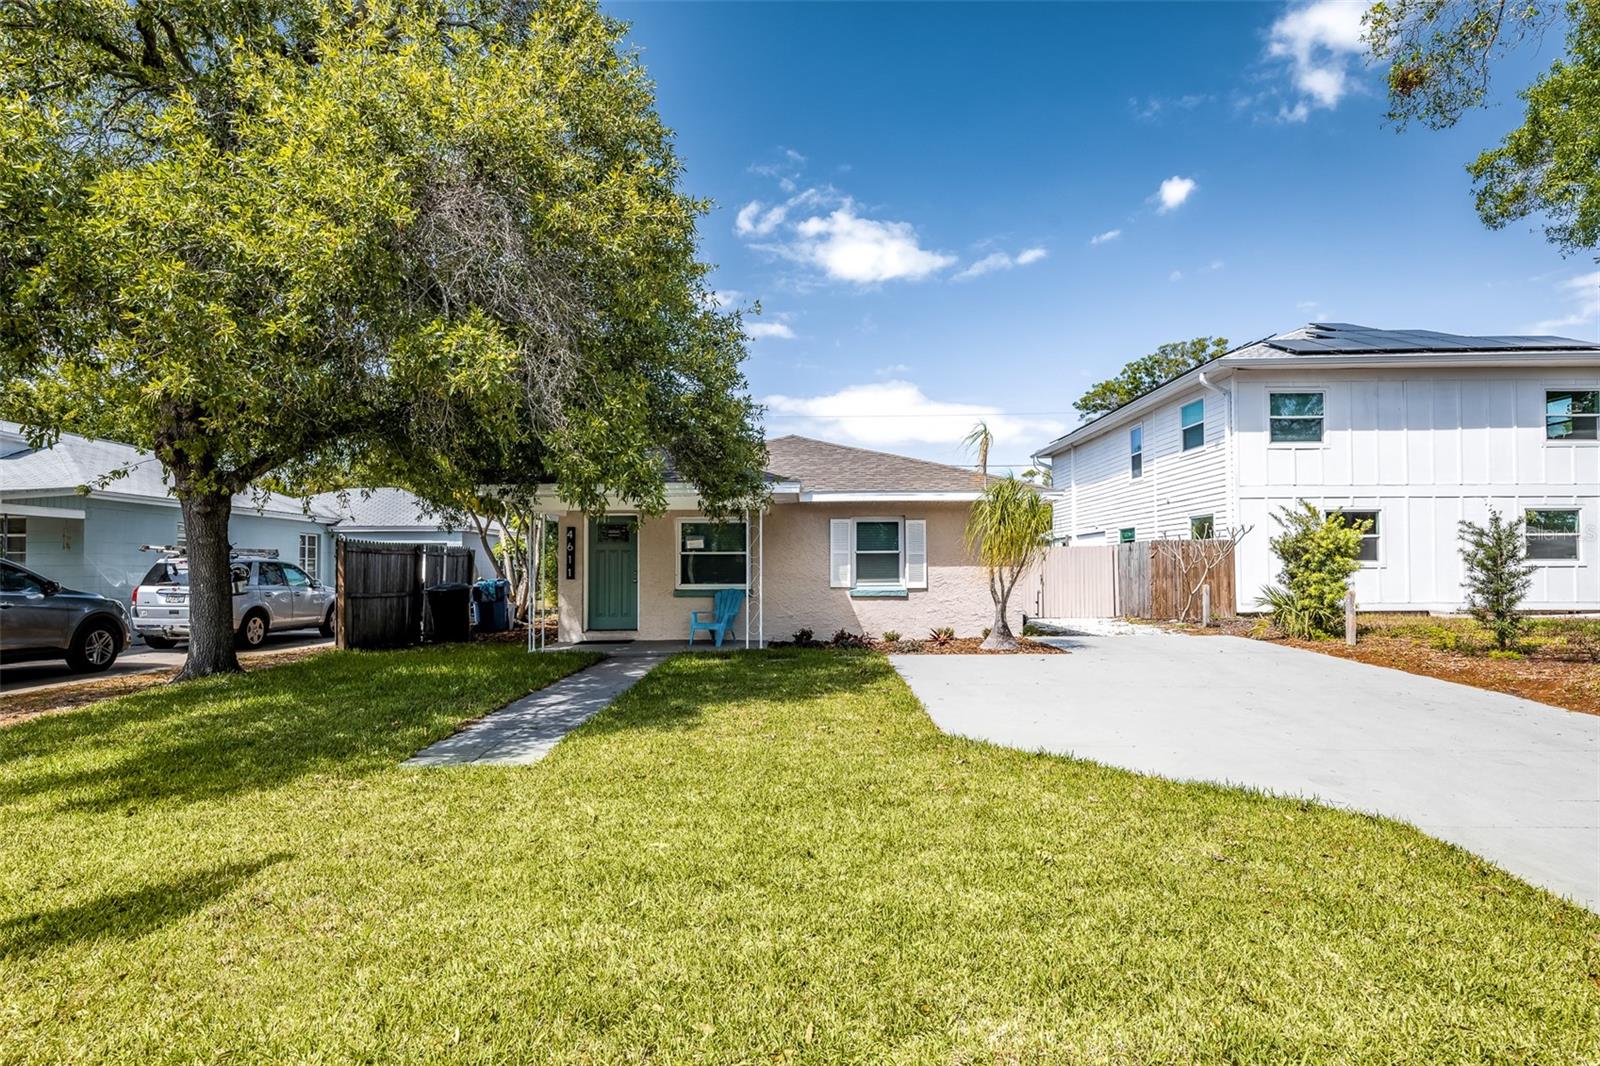 Super Cute Renovated House in St Pete-Centrally located and close to everything